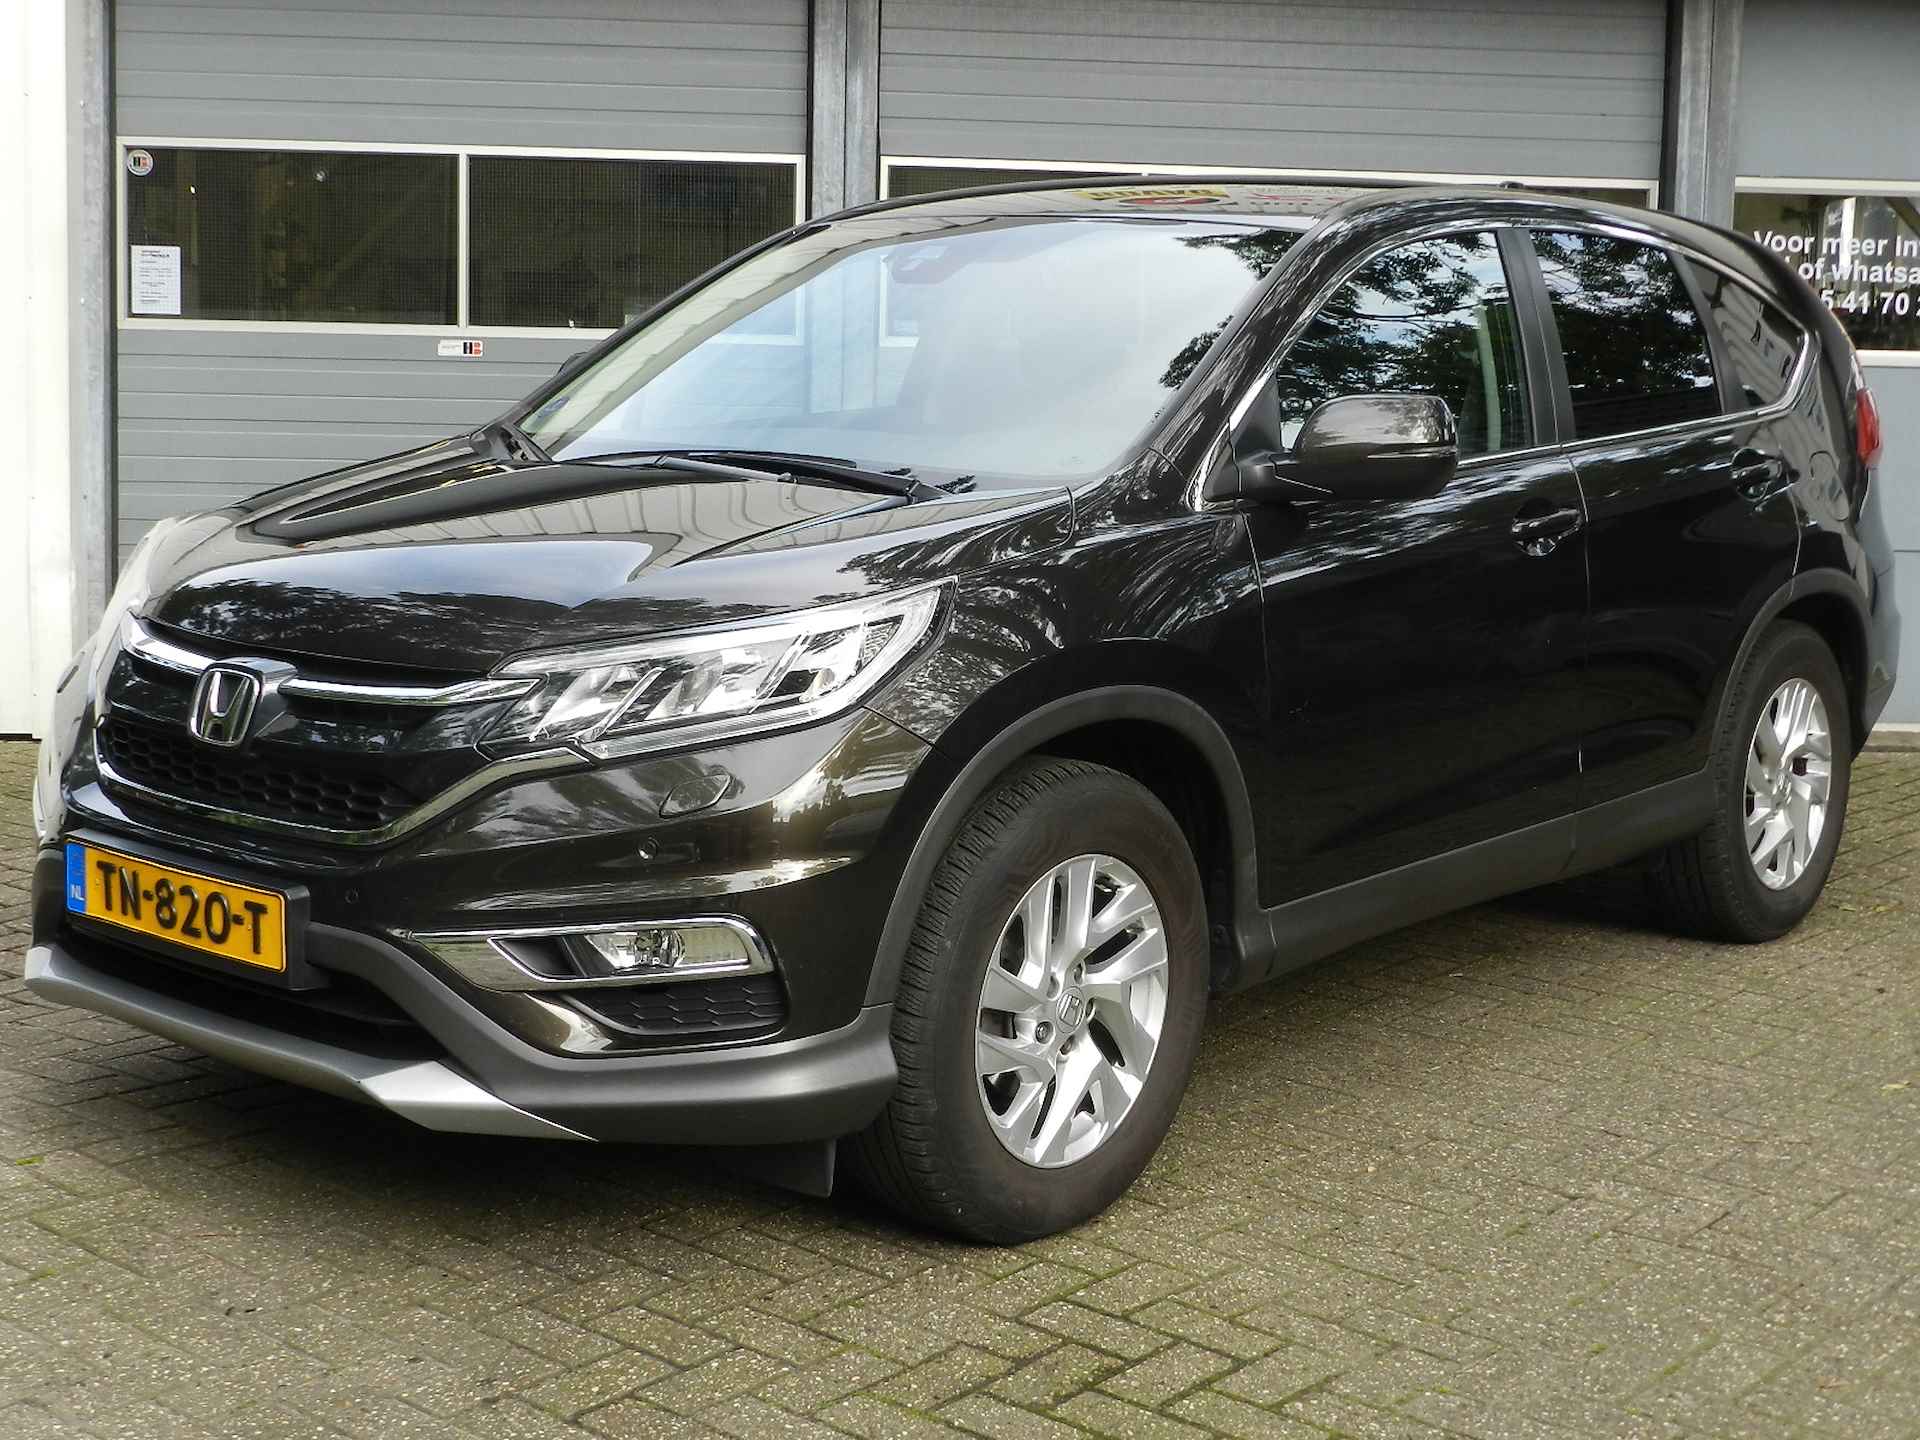 Honda CR-V 2.0 4WD Lifestyle Automaat Climate en Cruise contr PDC Camera - 8/50